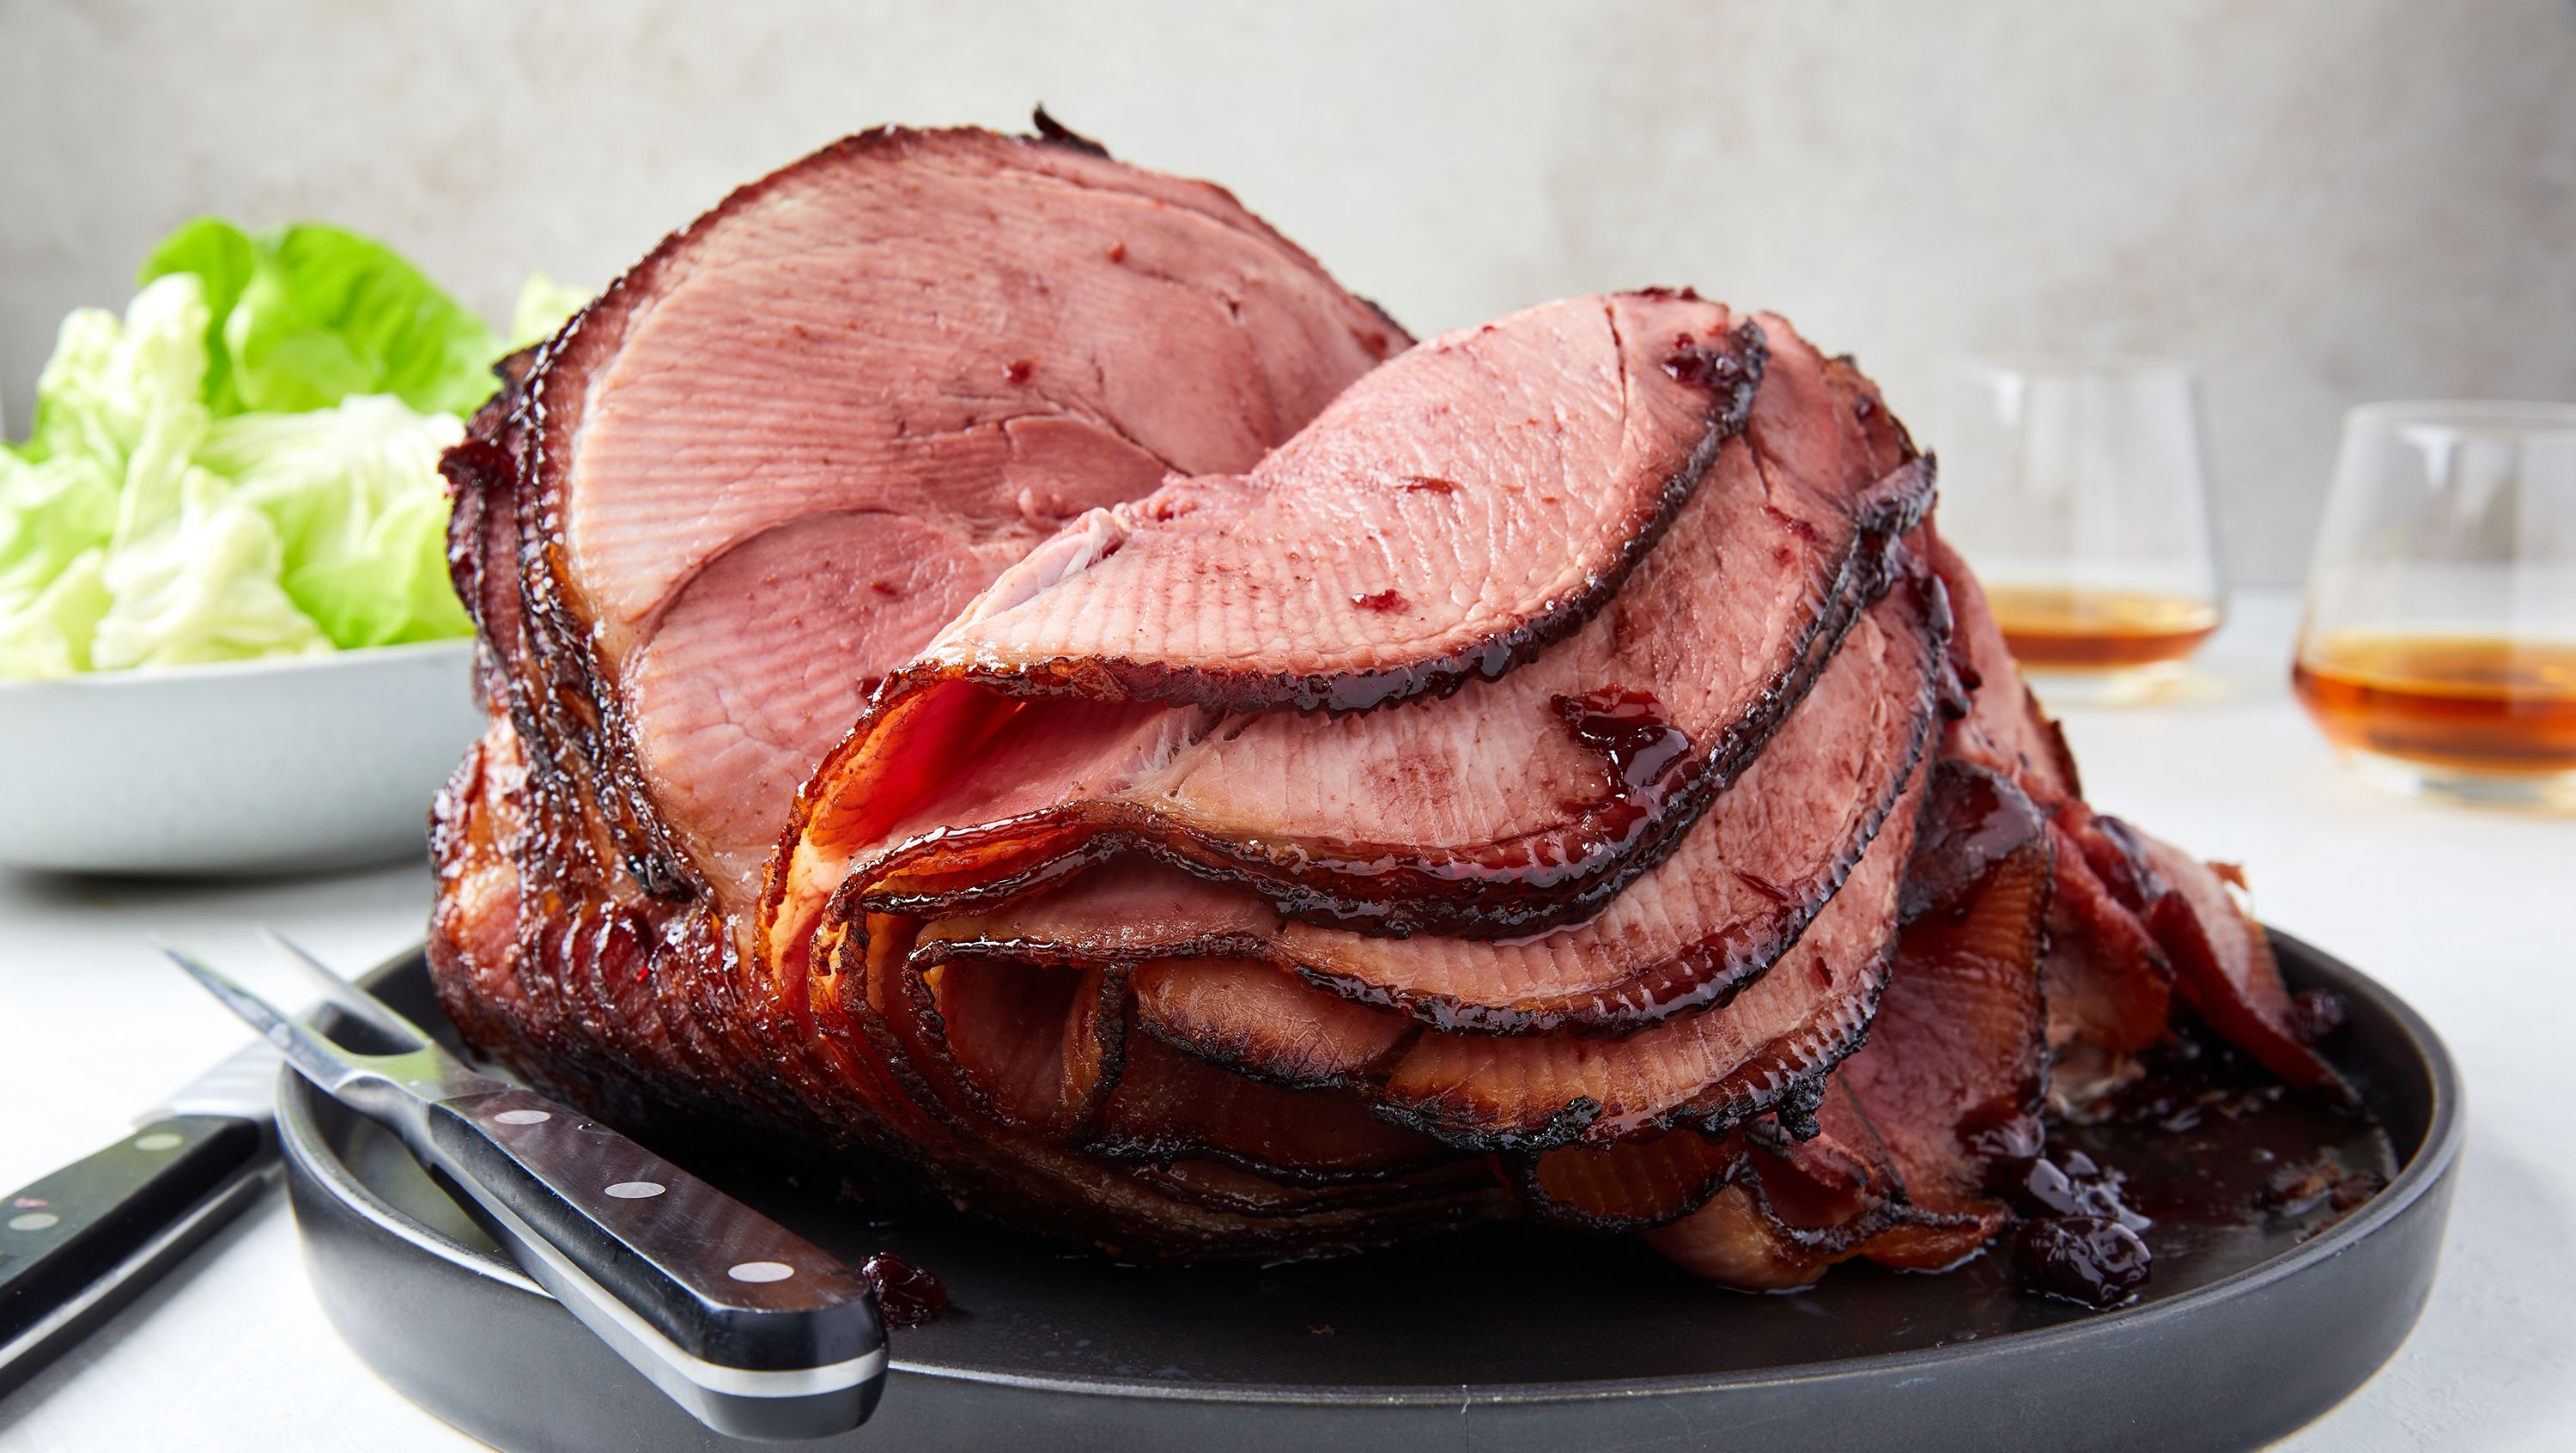 How To Cook A Ham - Best Baked Ham Recipe